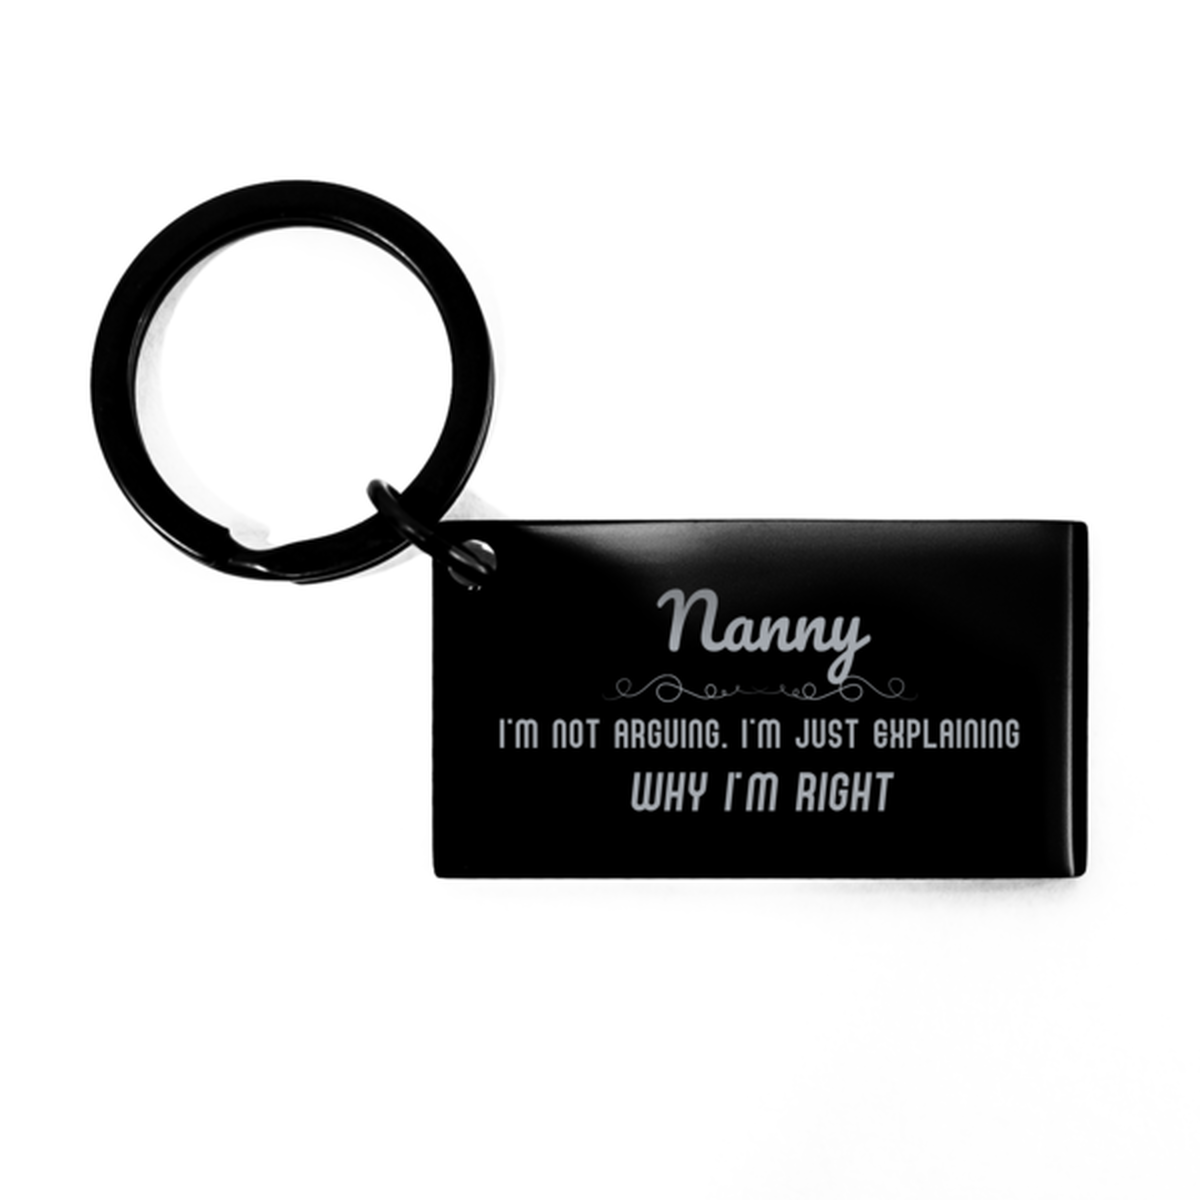 Nanny I'm not Arguing. I'm Just Explaining Why I'm RIGHT Keychain, Funny Saying Quote Nanny Gifts For Nanny Graduation Birthday Christmas Gifts for Men Women Coworker